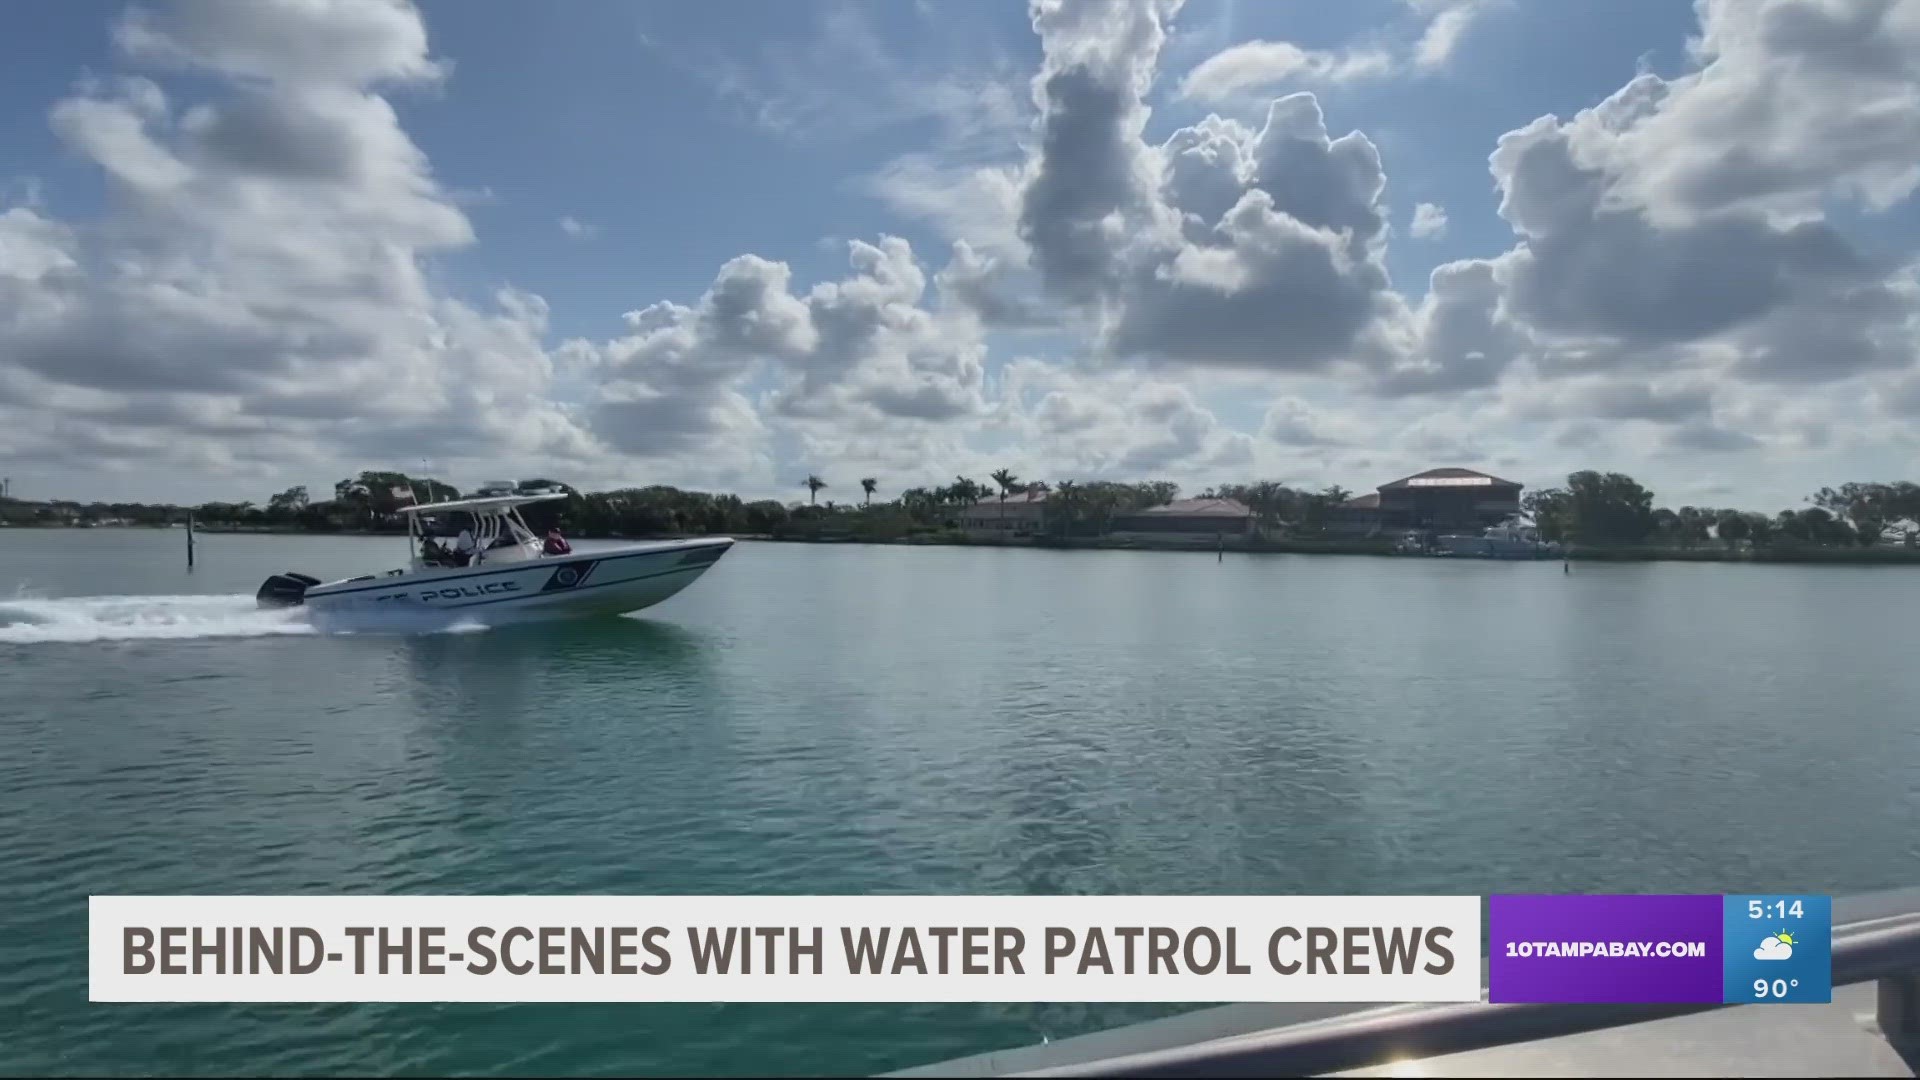 Water safety experts say wearing a life jacket that is U.S. Coast Guard-approved can prevent fatalities on the water.